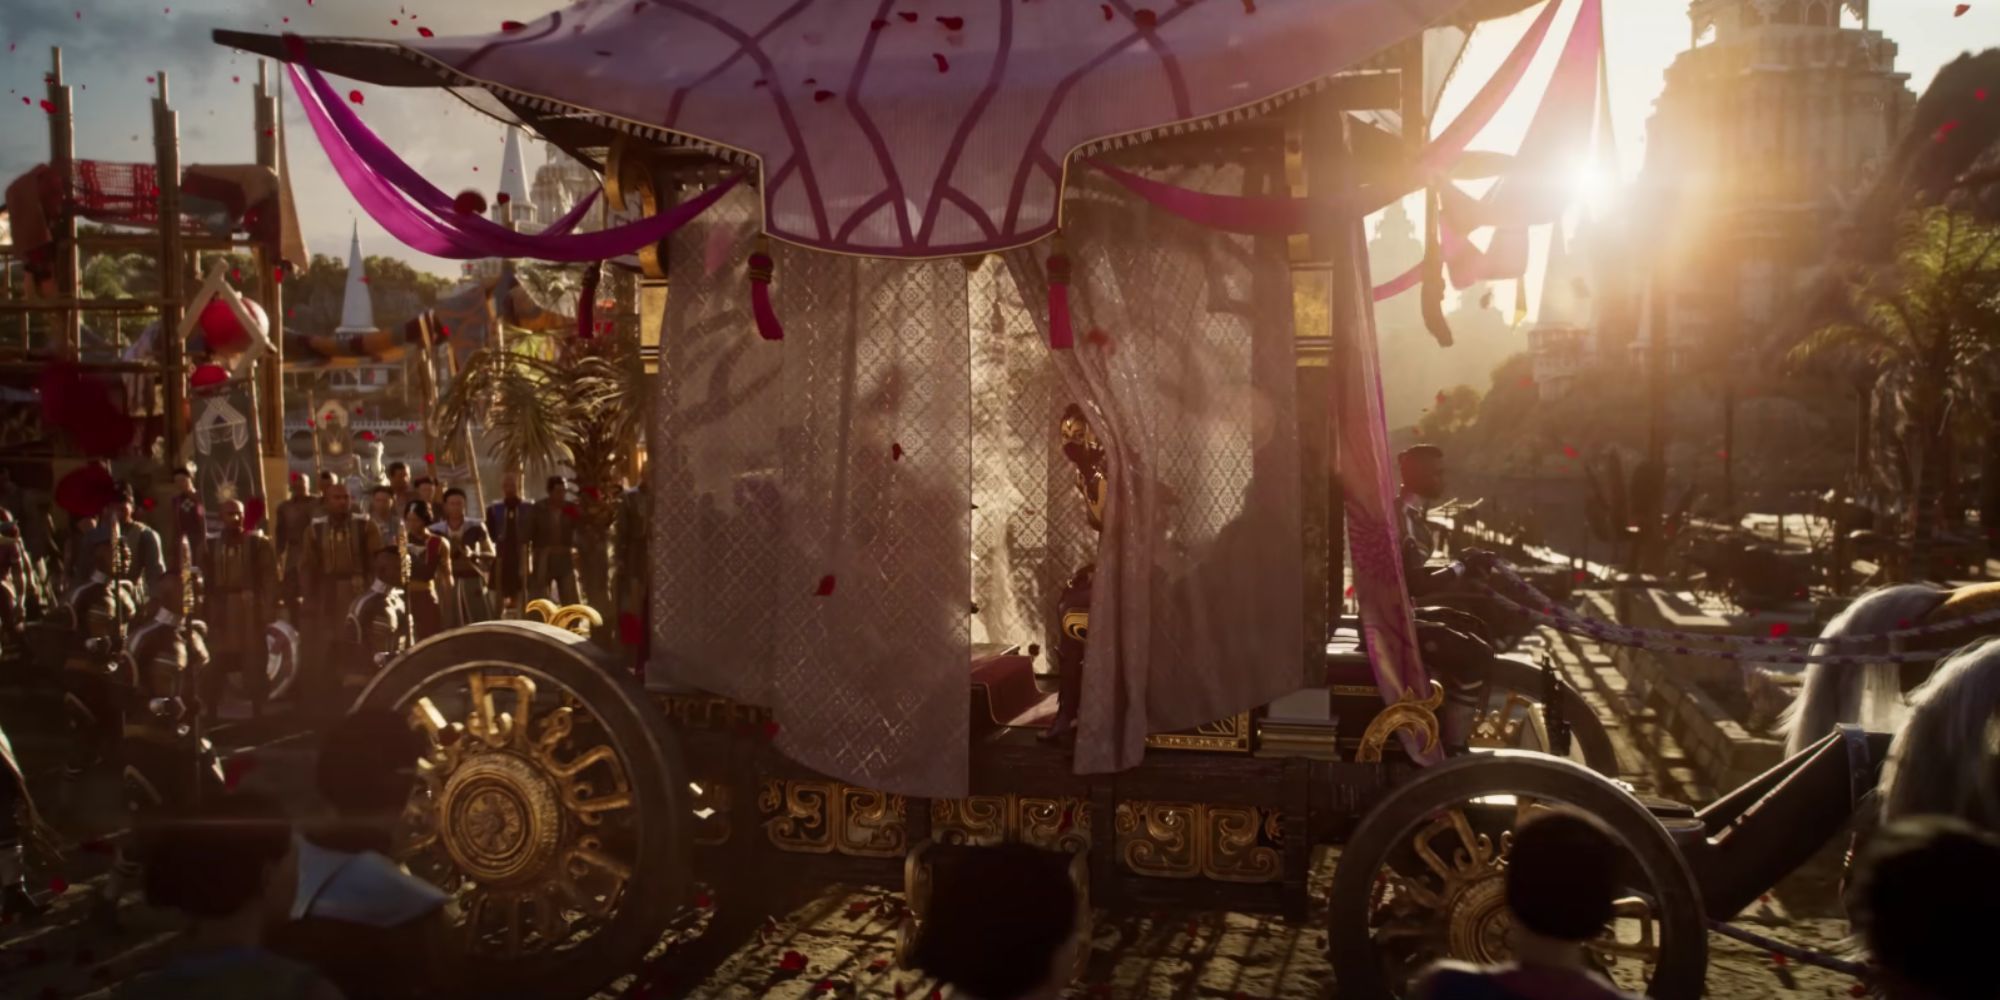 A carriage containing Mileena and Kitana in Mortal Kombat 1.